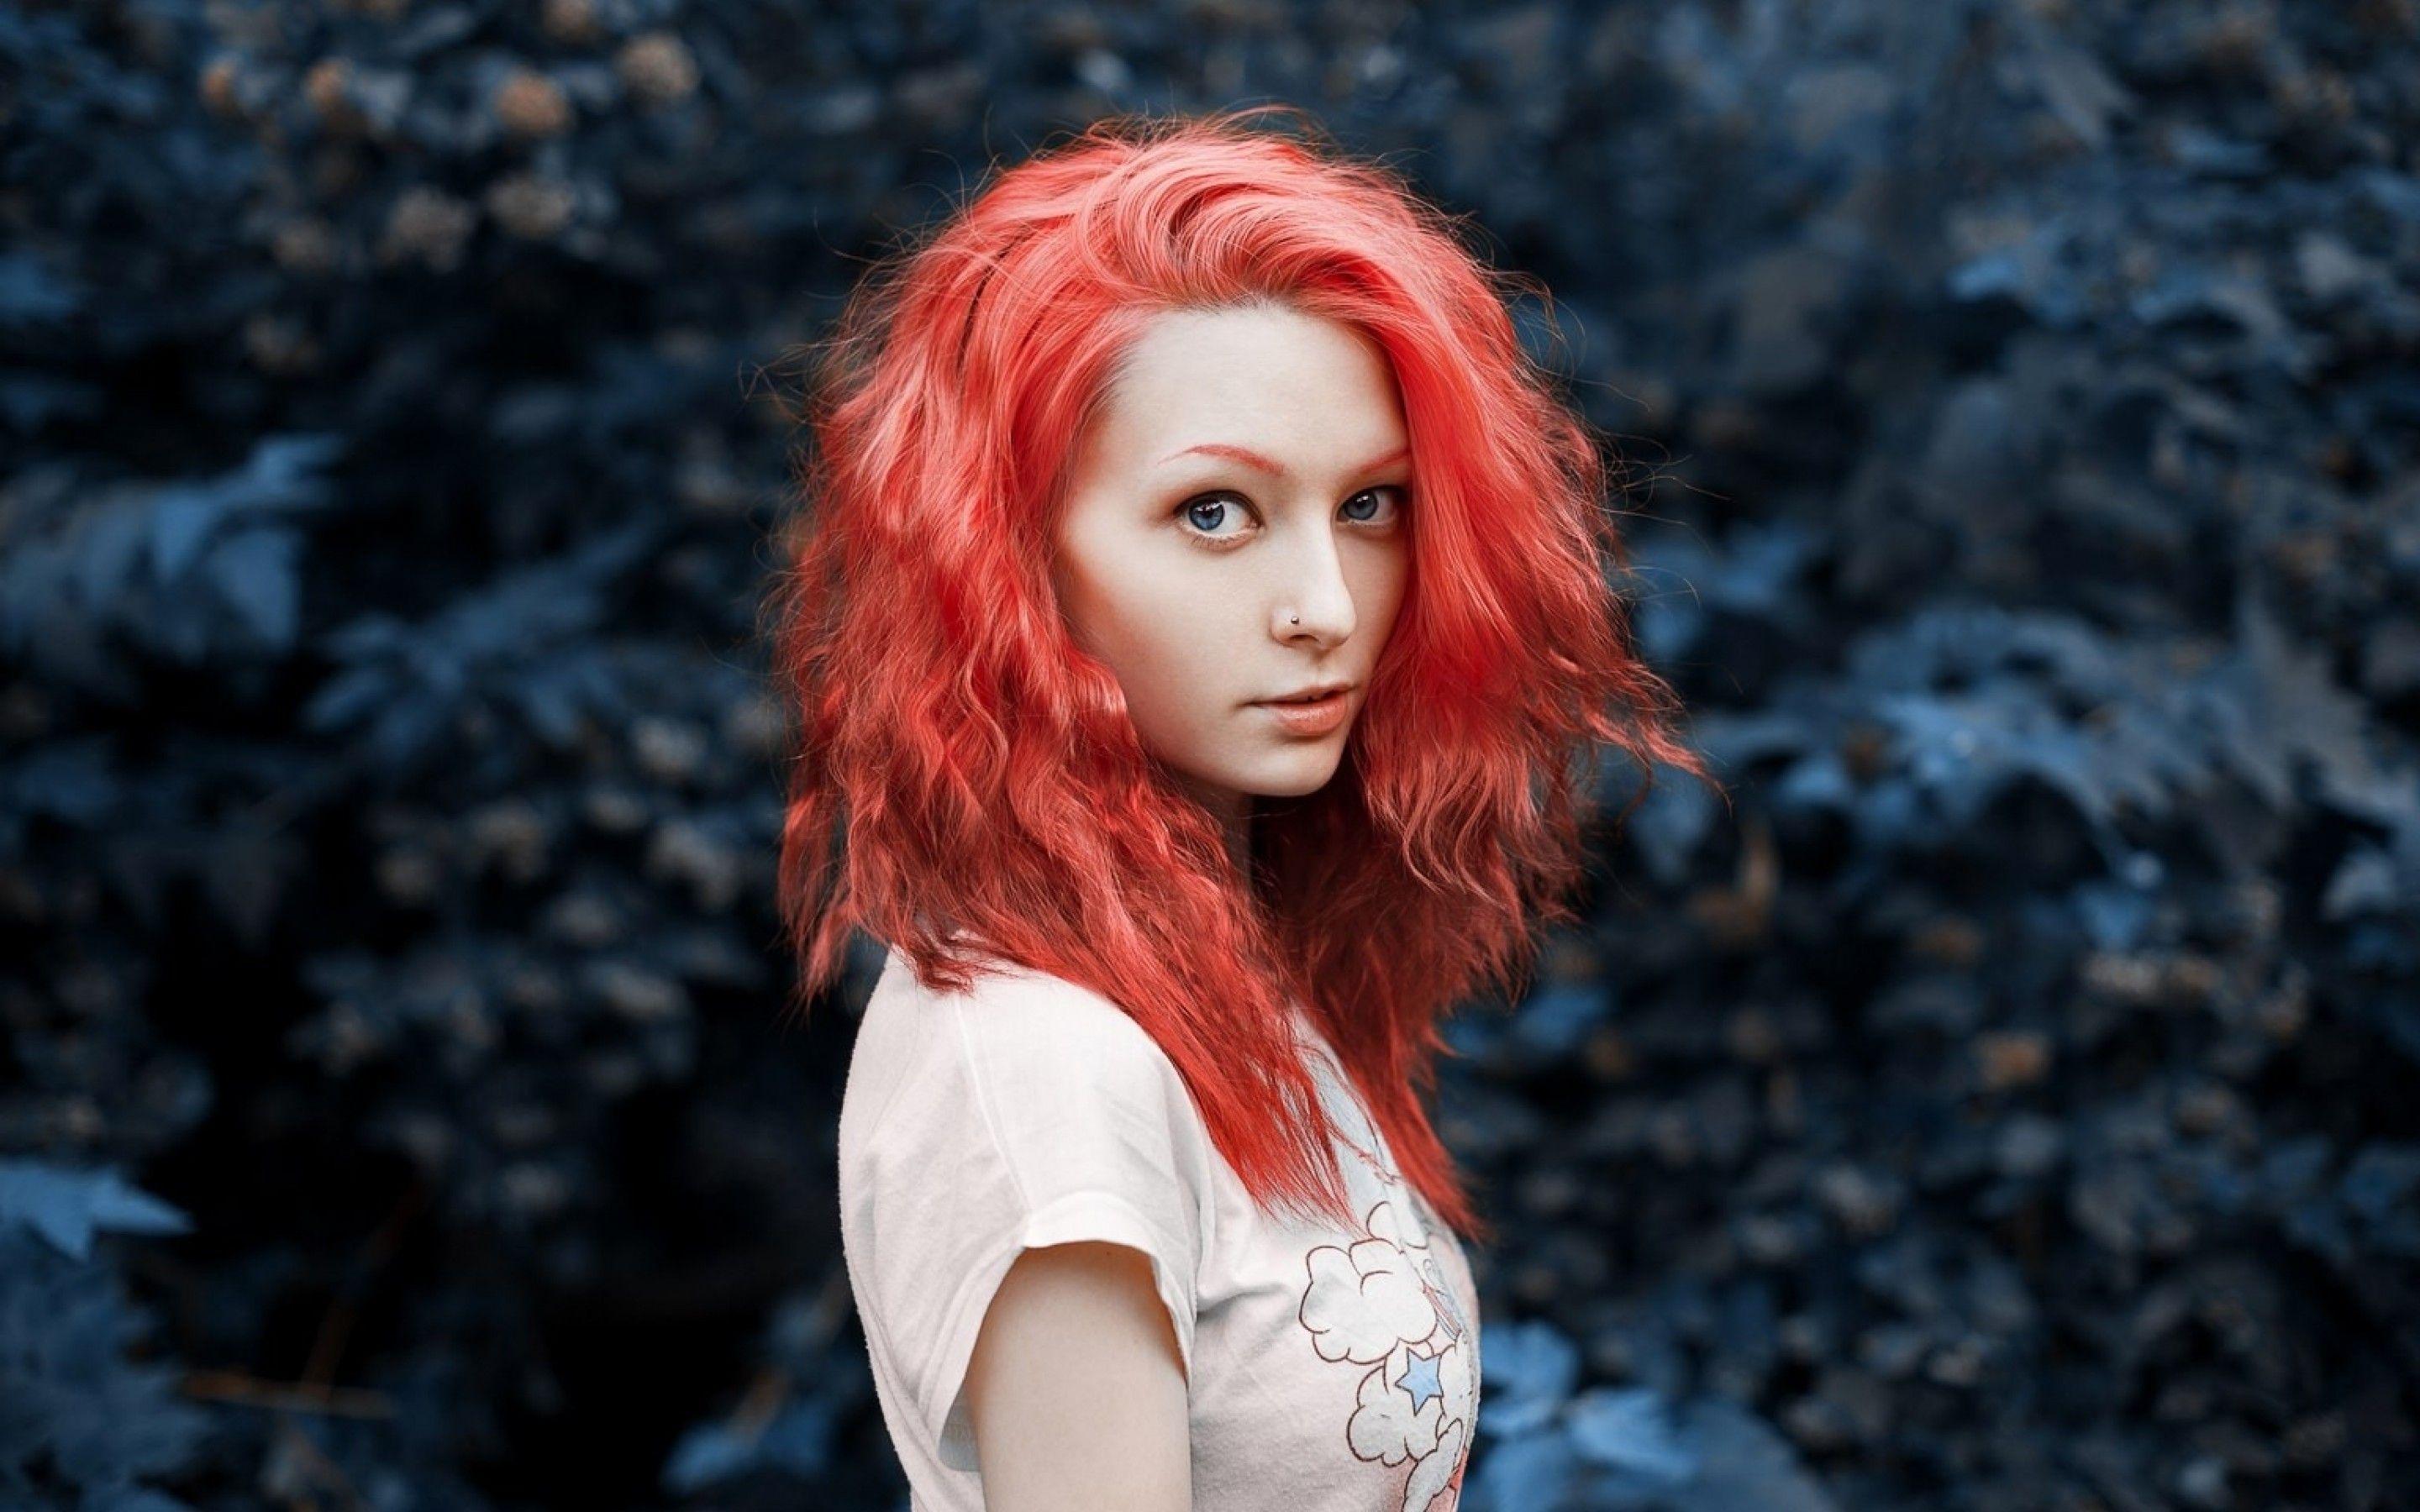 Download 2880x1800 Model, Colored Hair, Pink, Dyed, Women Wallpaper